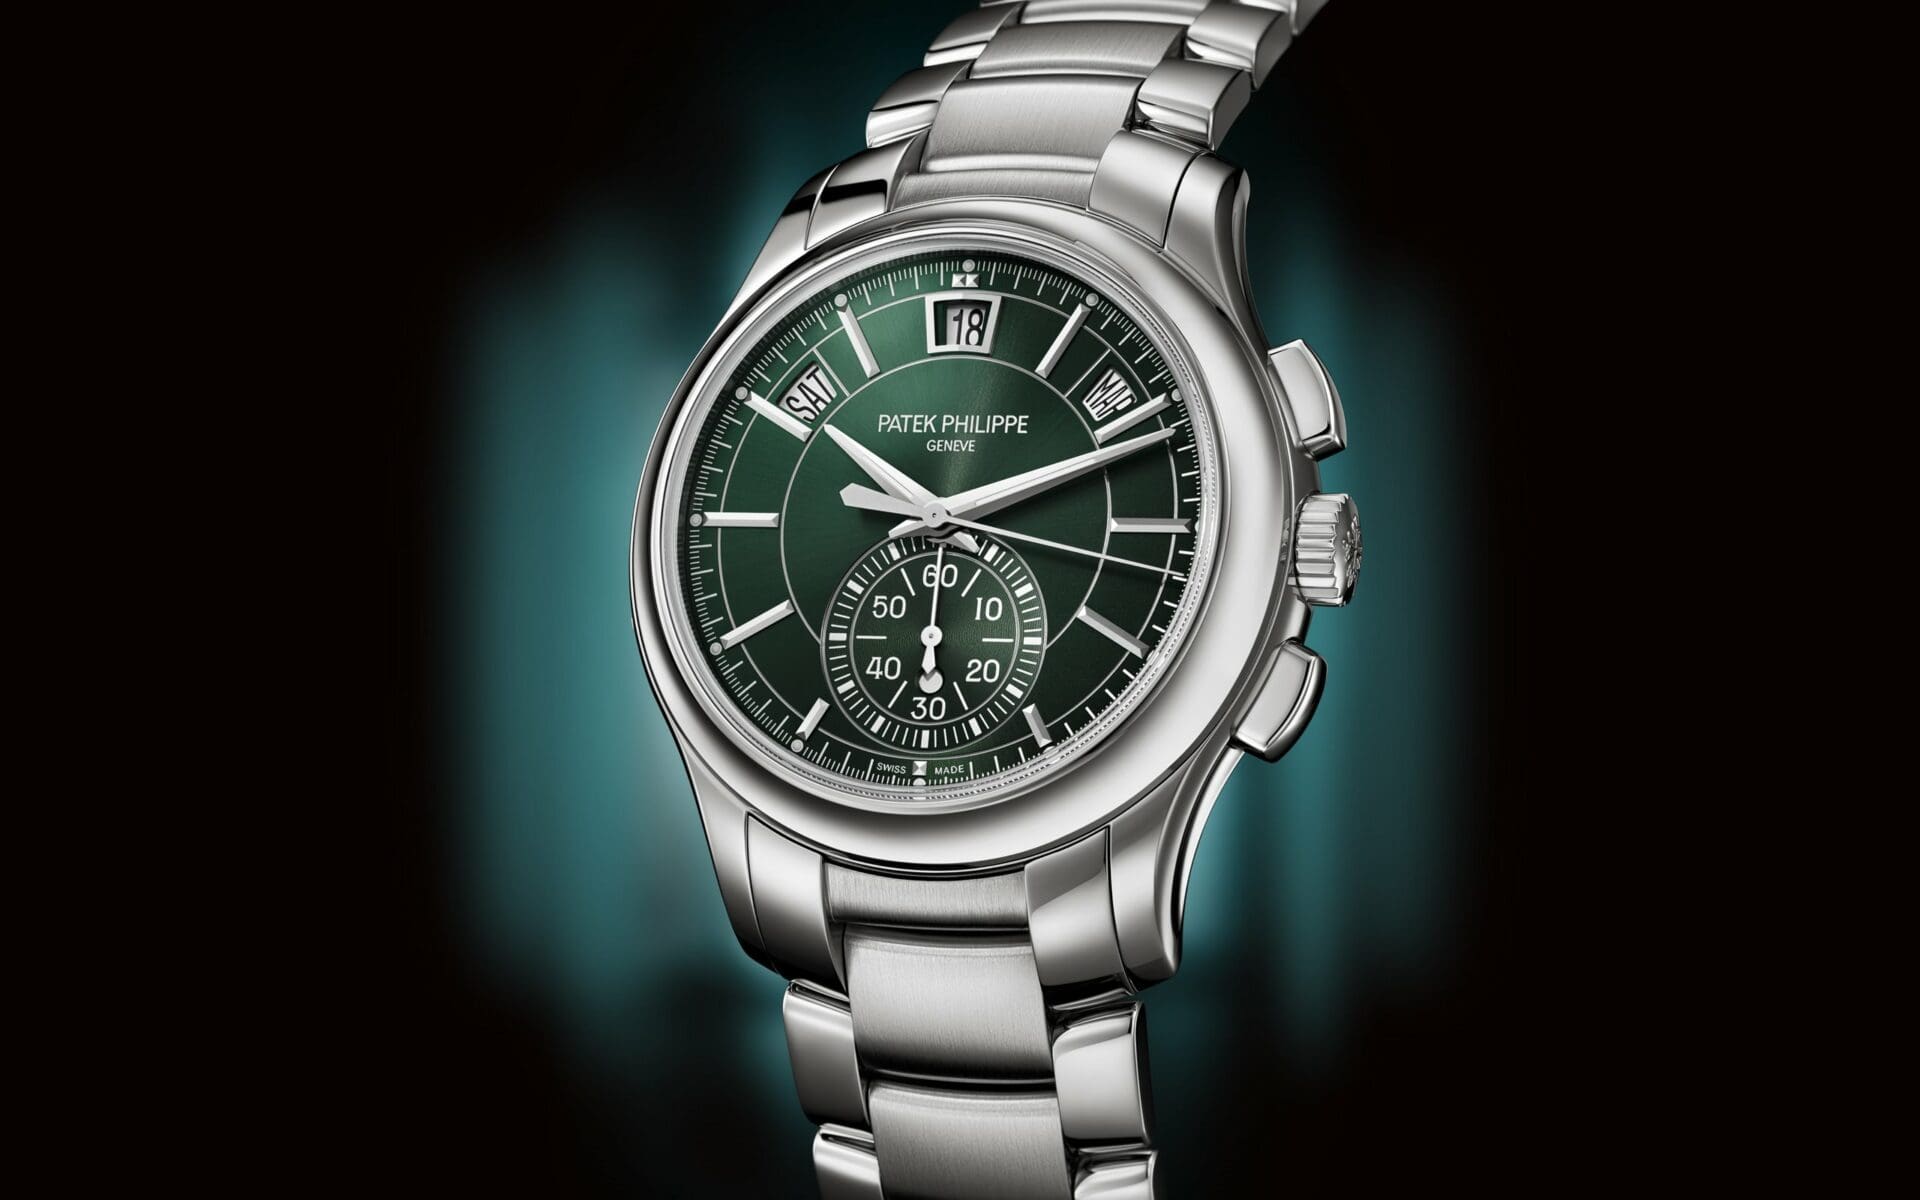 What the Patek Phillipe 5095/1A potentially suggests about the future of the brand in steel